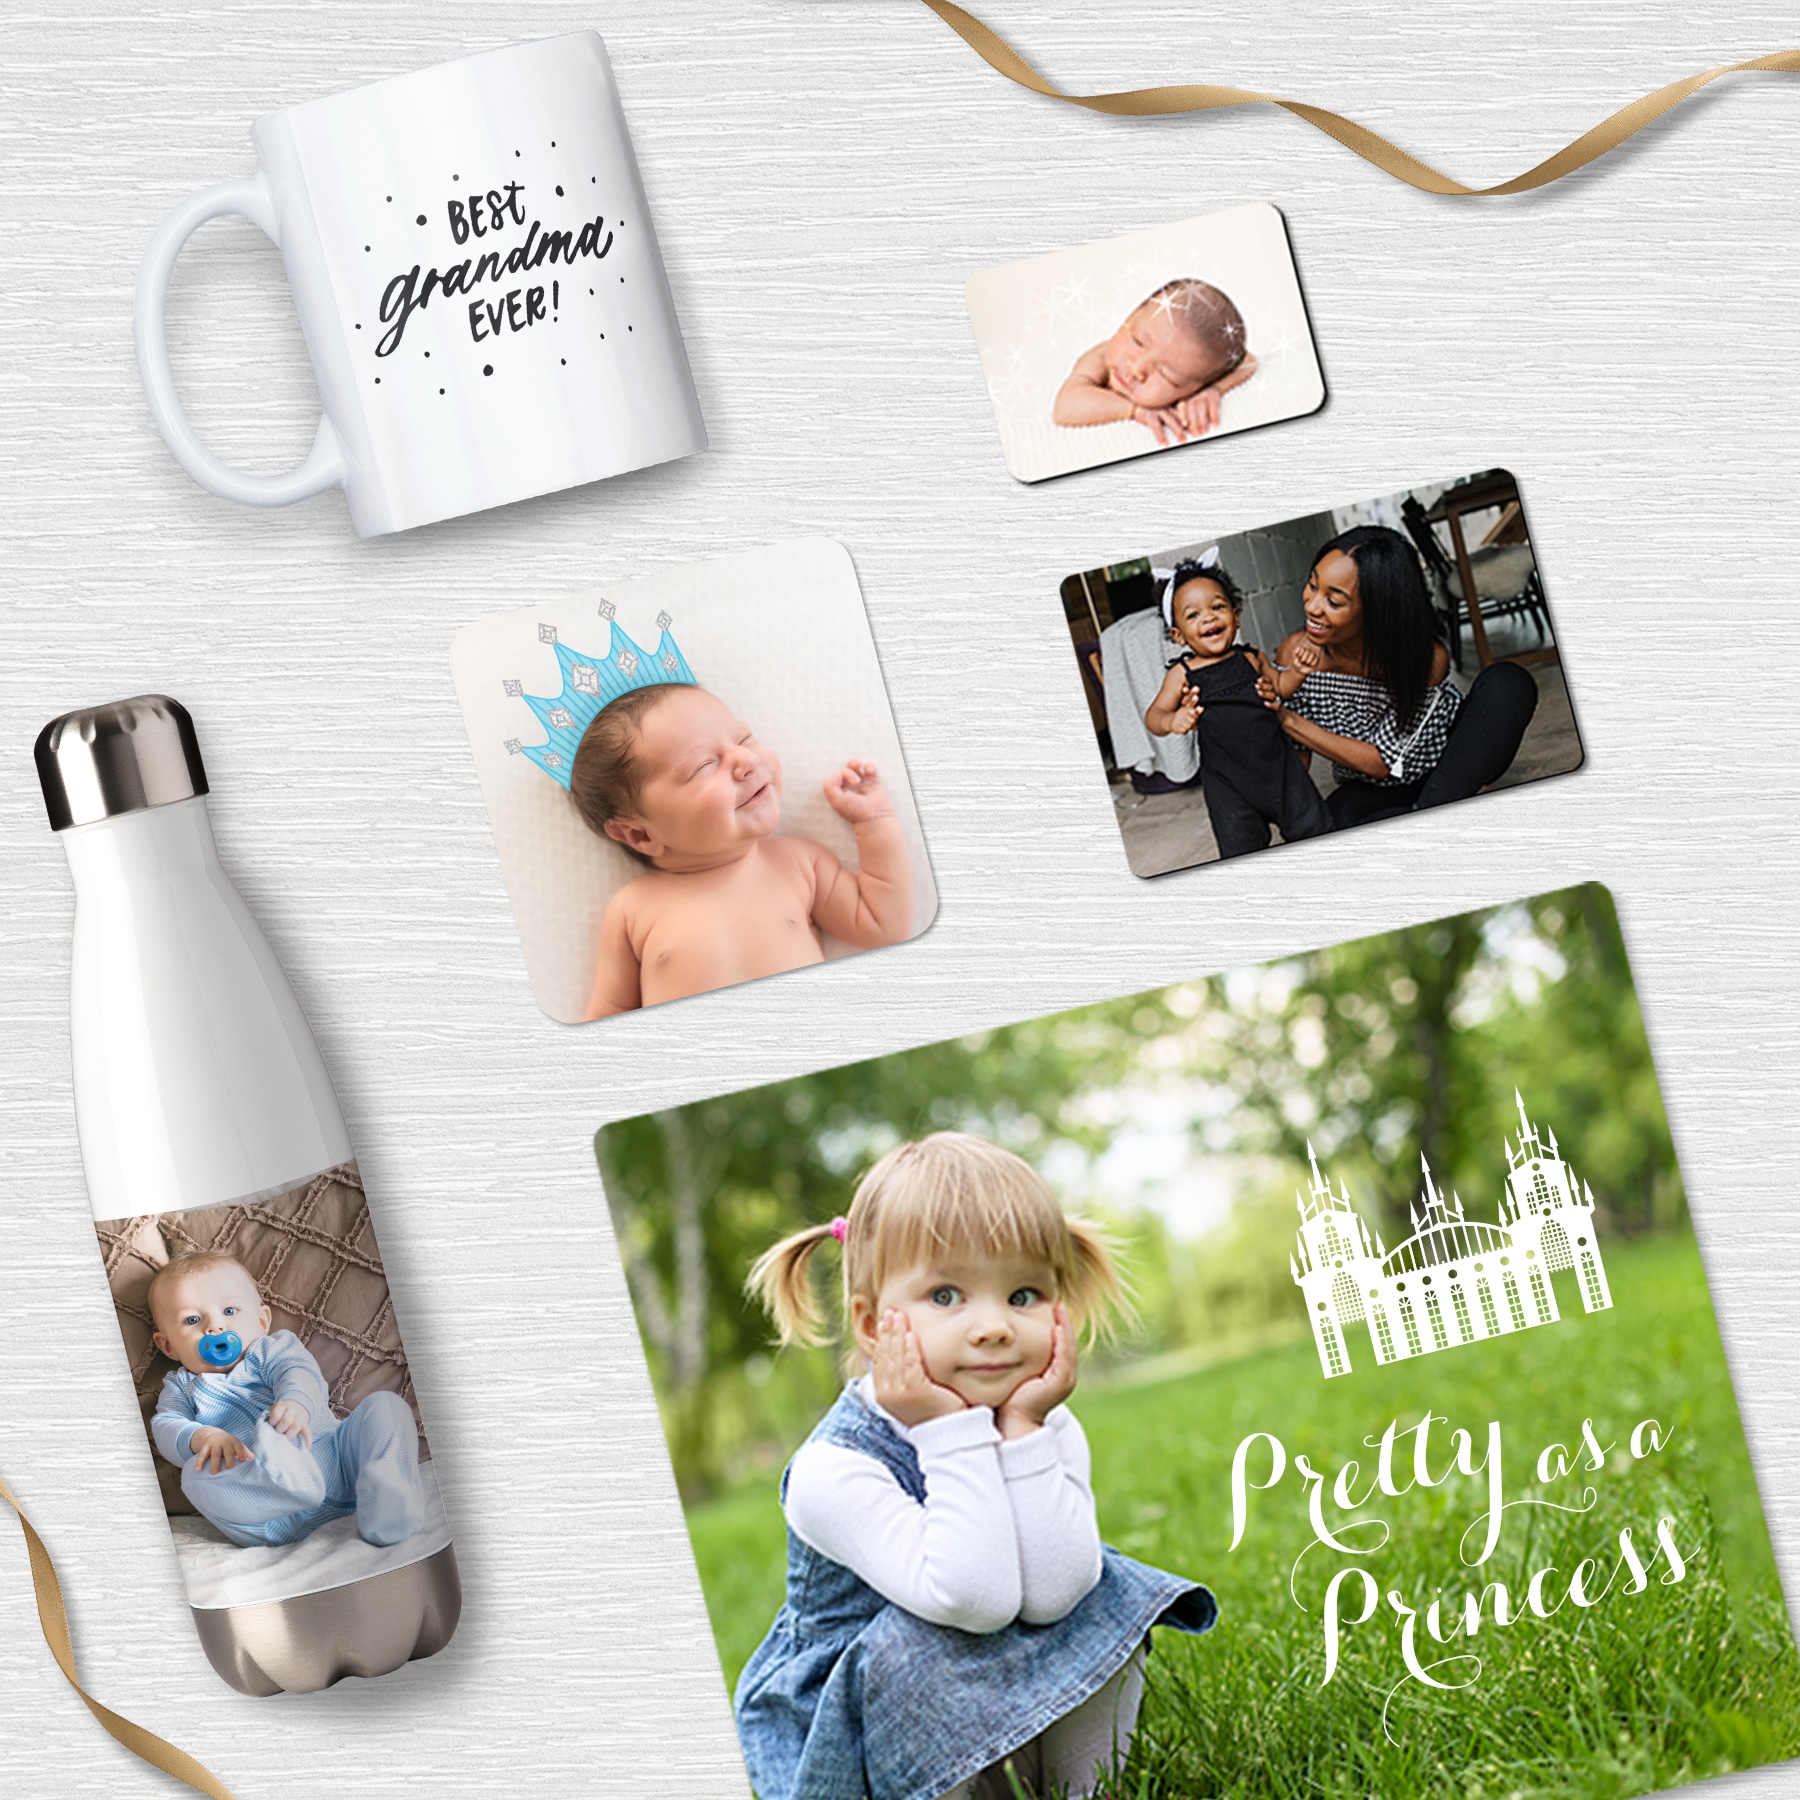 Nursery Décor + Gifts for Your Prince or Princess